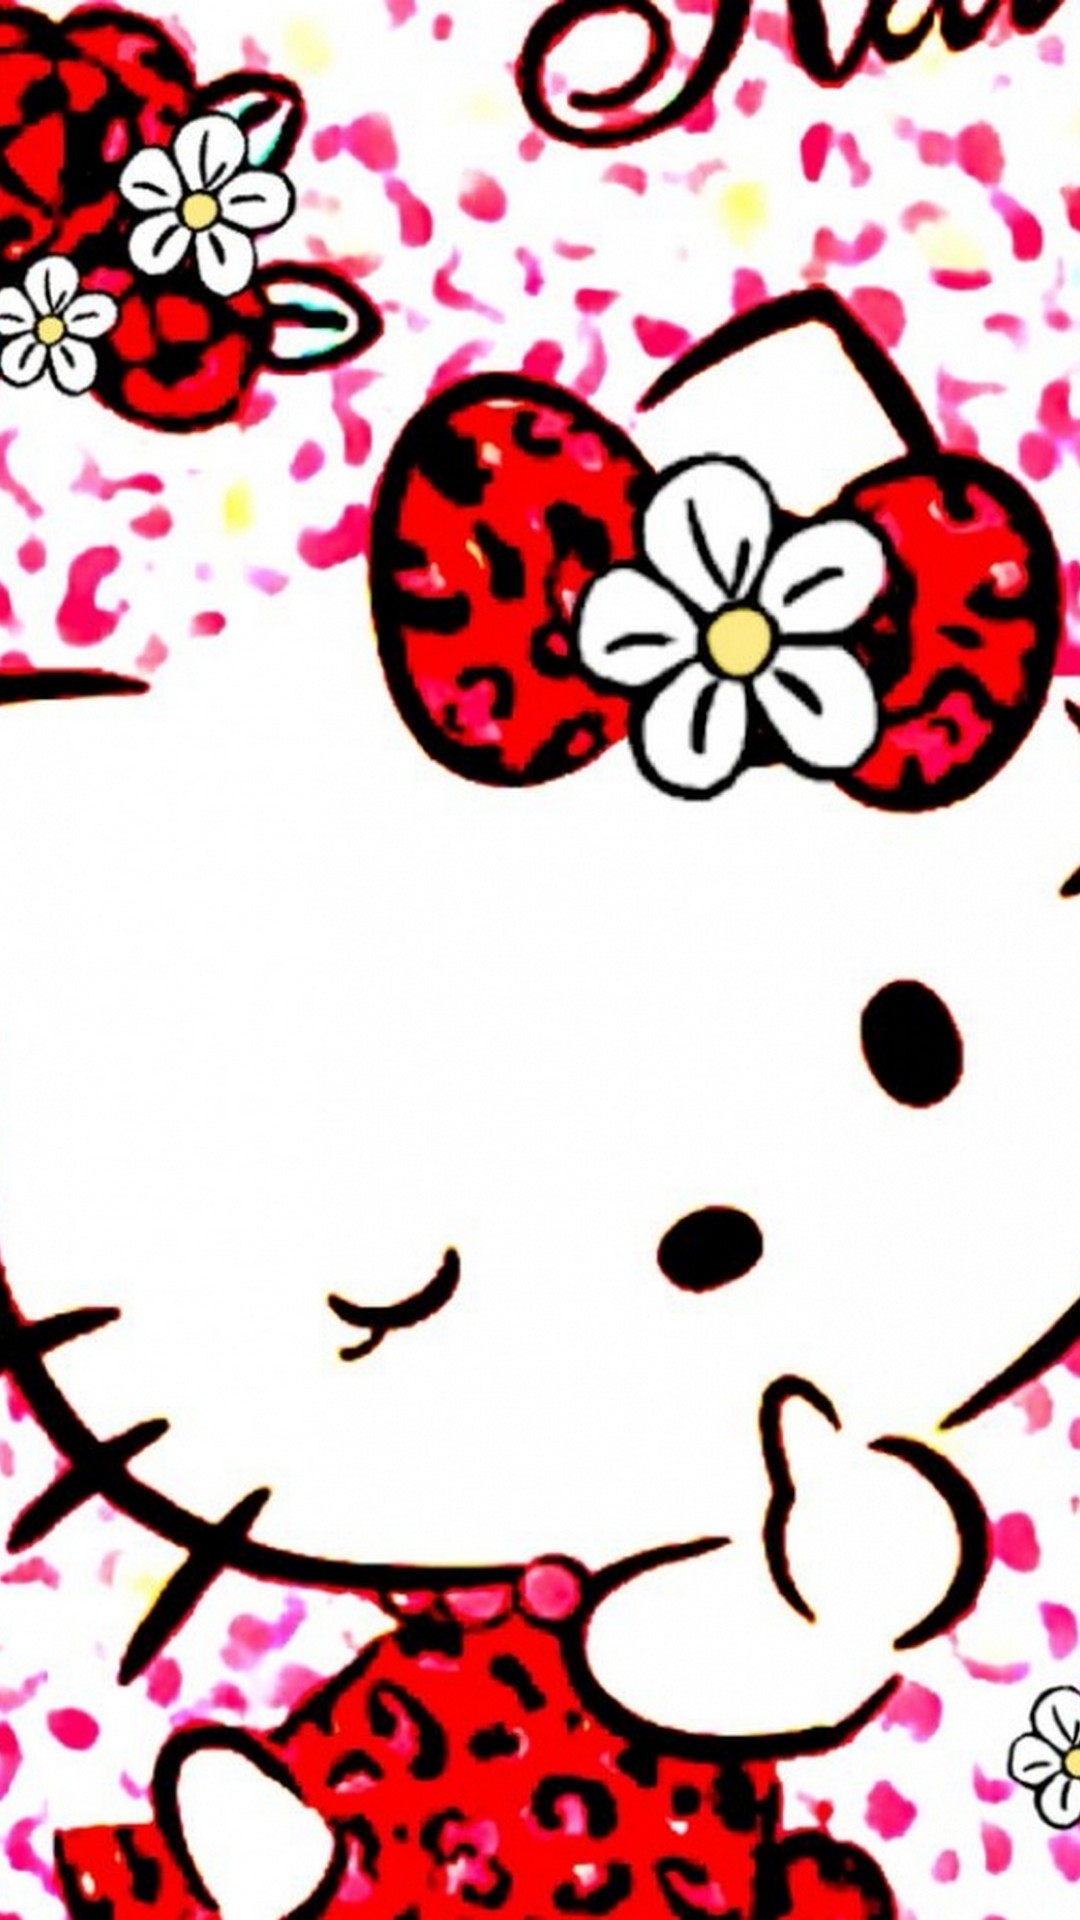 Wallpaper Hello Kitty Images iPhone with image resolution 1080x1920 pixel. You can make this wallpaper for your iPhone 5, 6, 7, 8, X backgrounds, Mobile Screensaver, or iPad Lock Screen